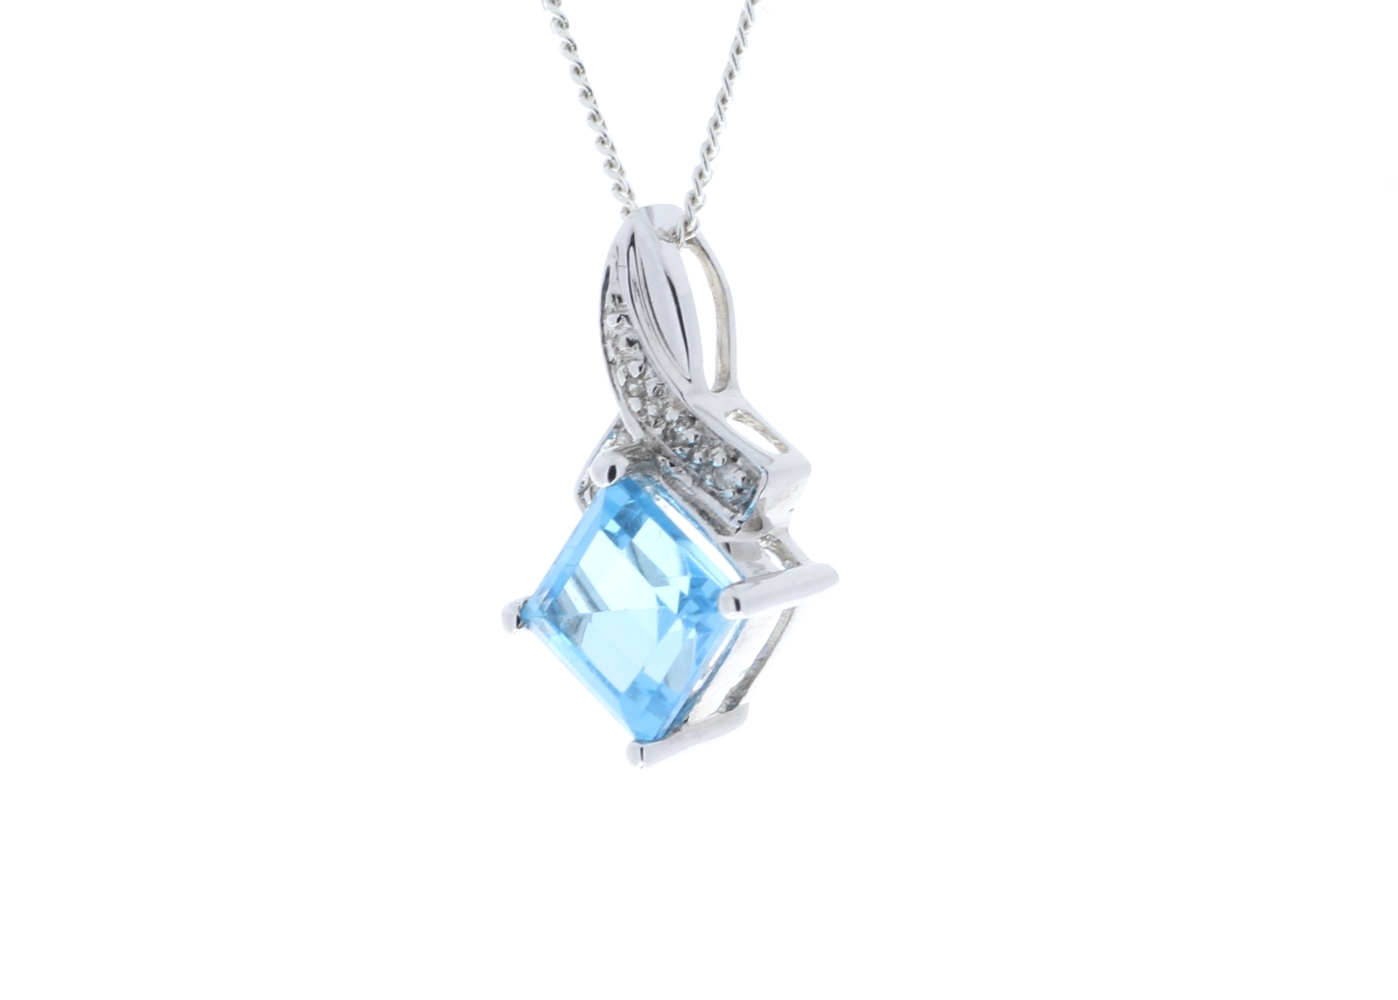 9ct White Gold Diamond And Blue Topaz Pendant (BT1.29) 0.02 Carats - Image 4 of 6